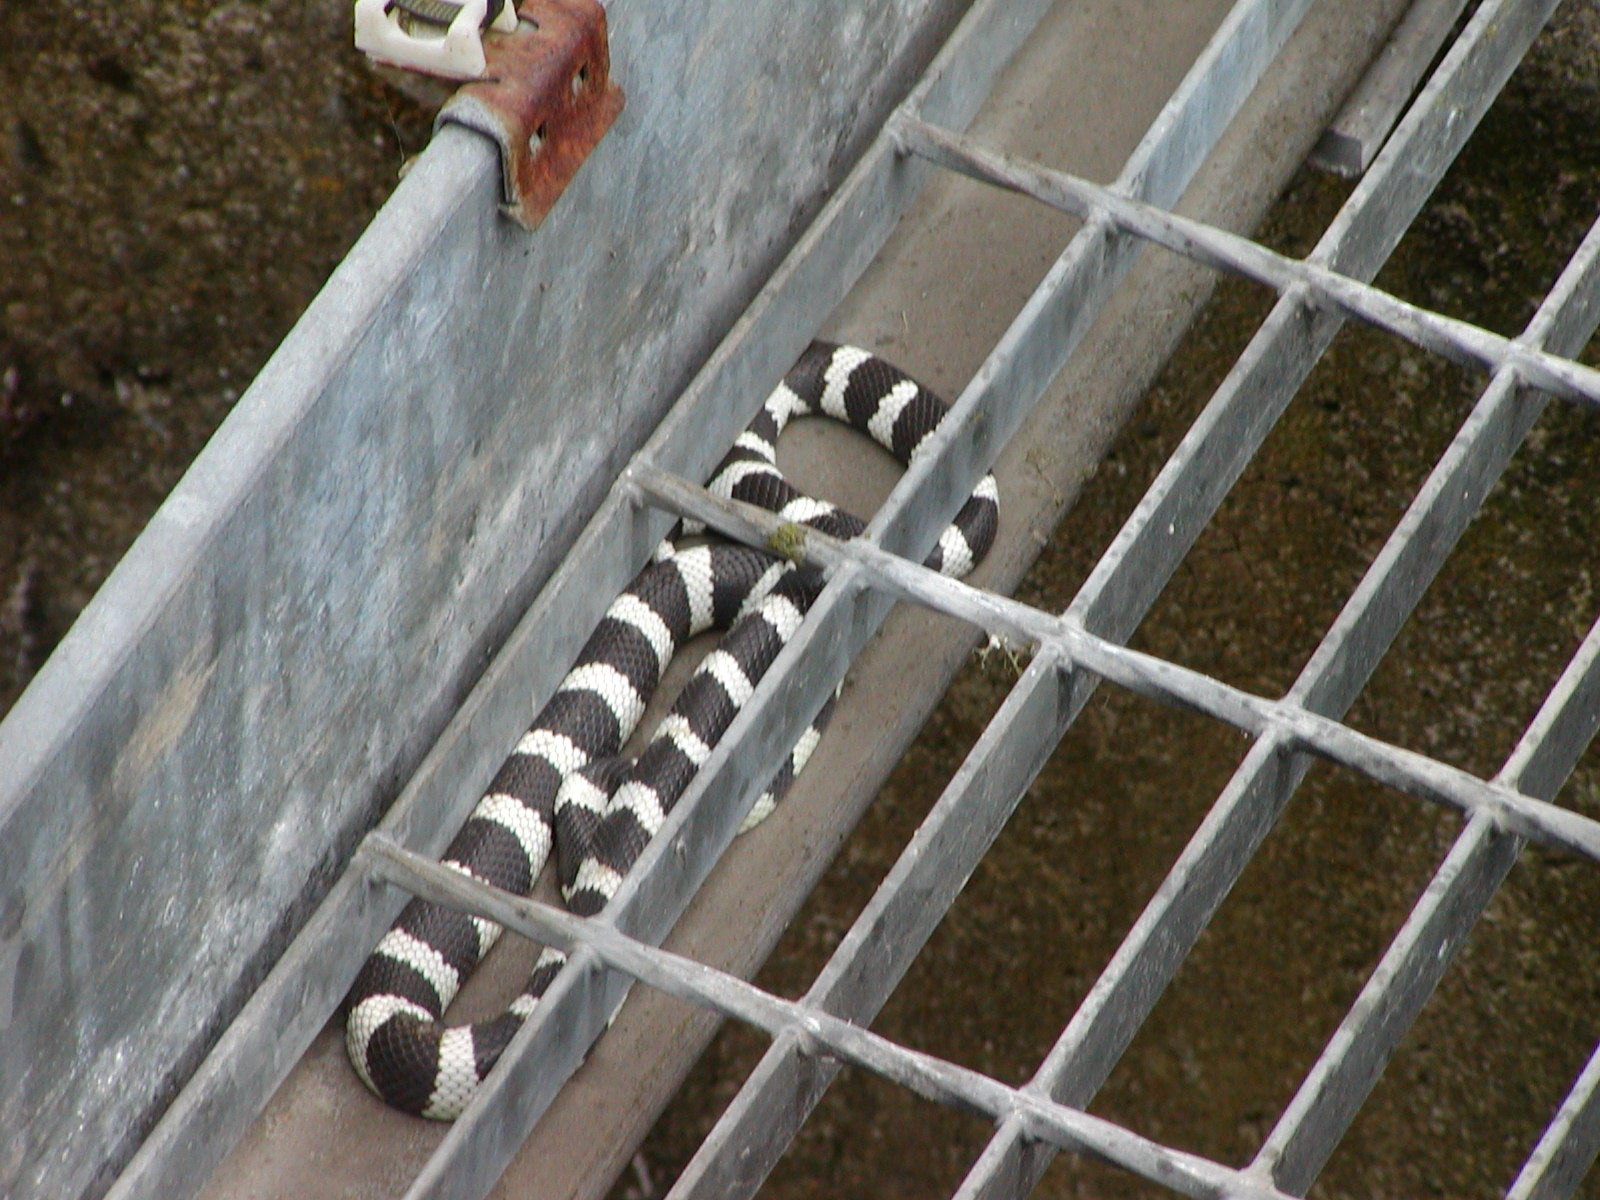 A snake found in the water works at Dunfermline